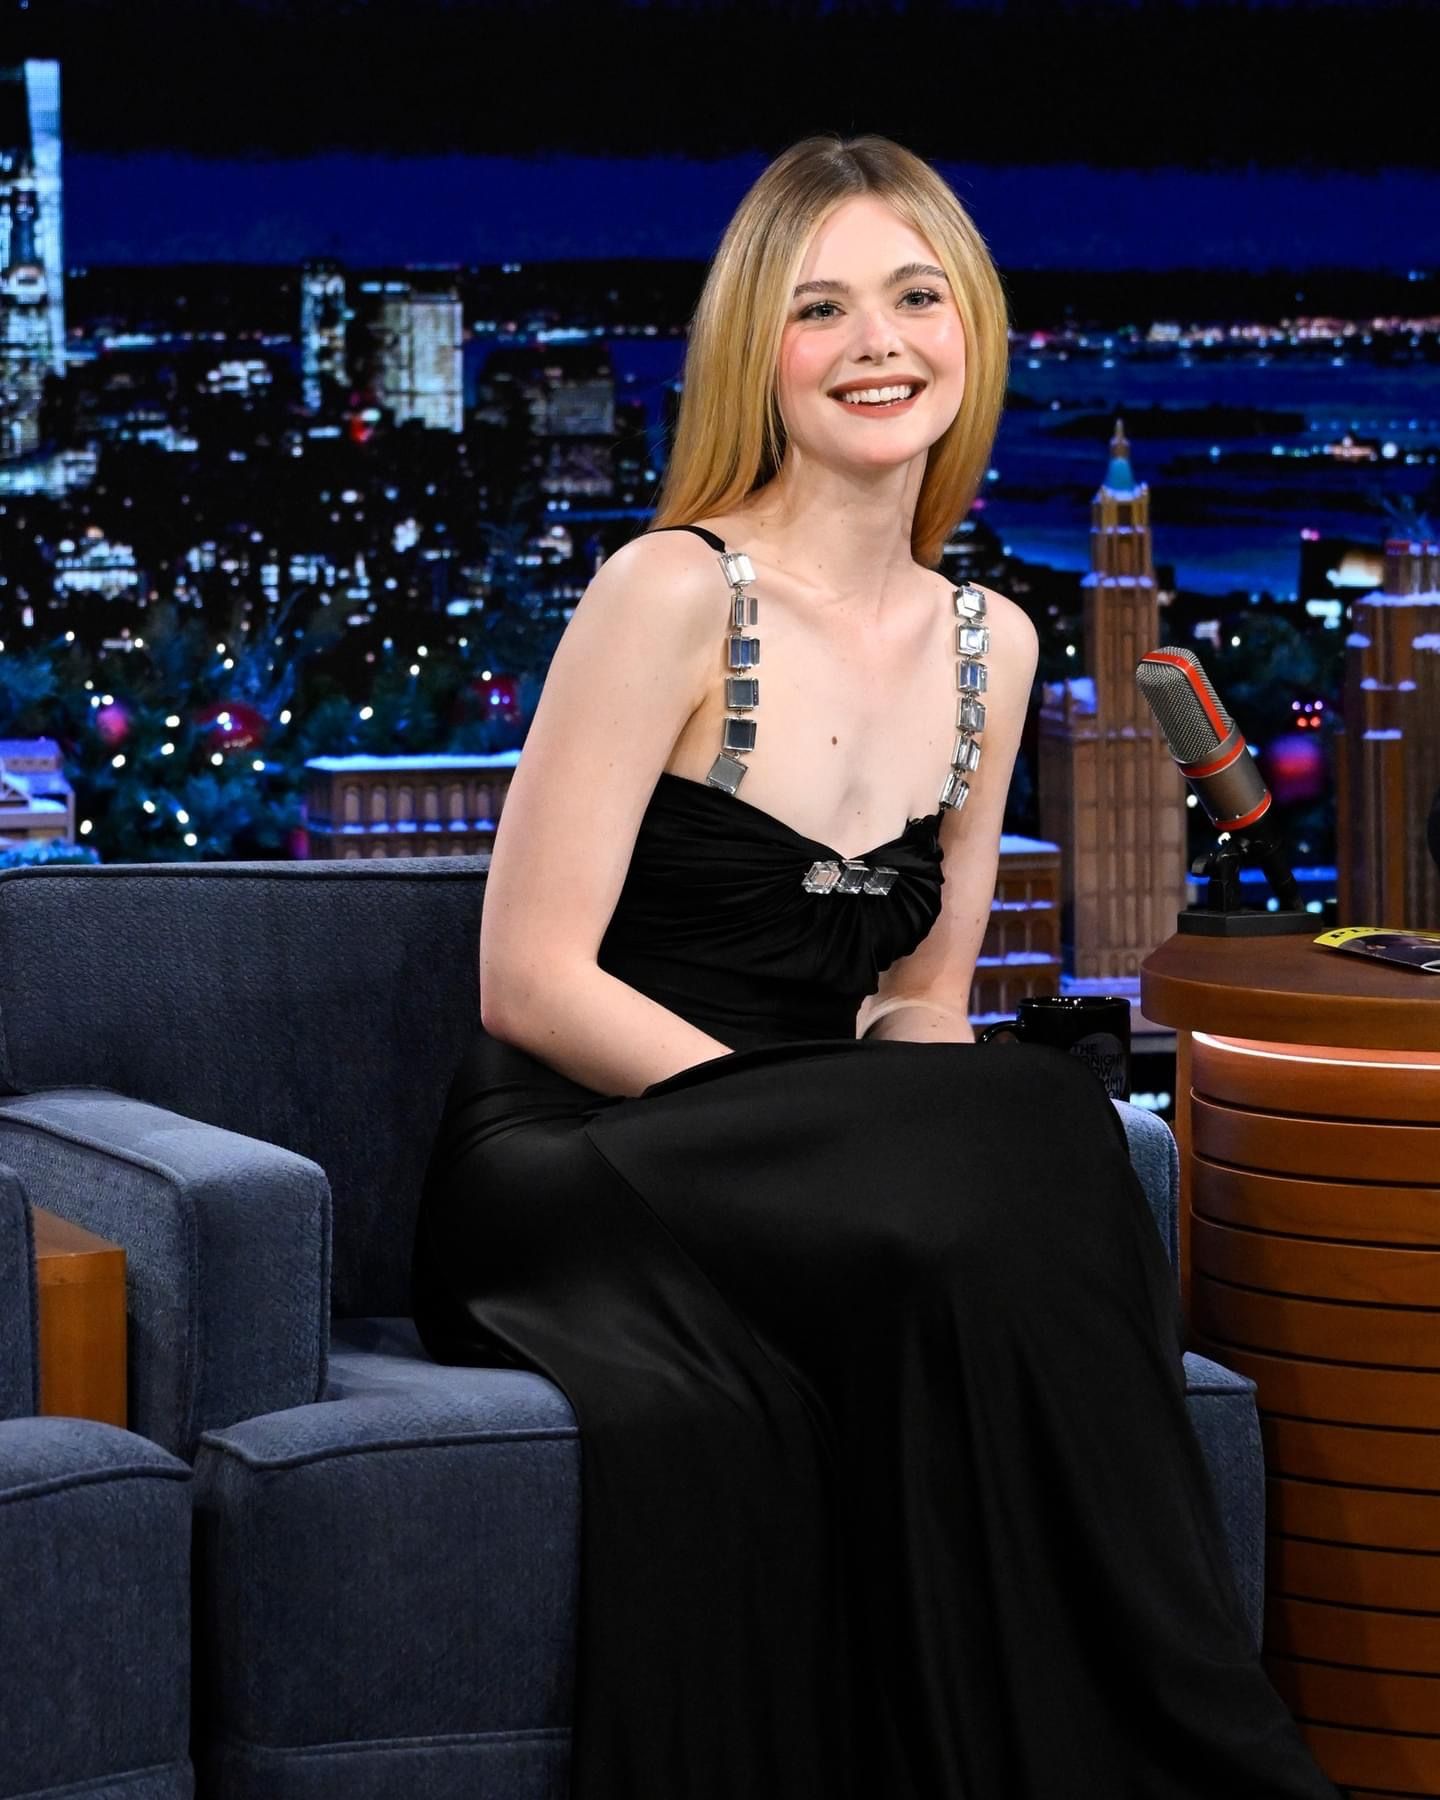 In Case You Missed It: Elle Fanning On Jimmy Fallon - Talking With Tami